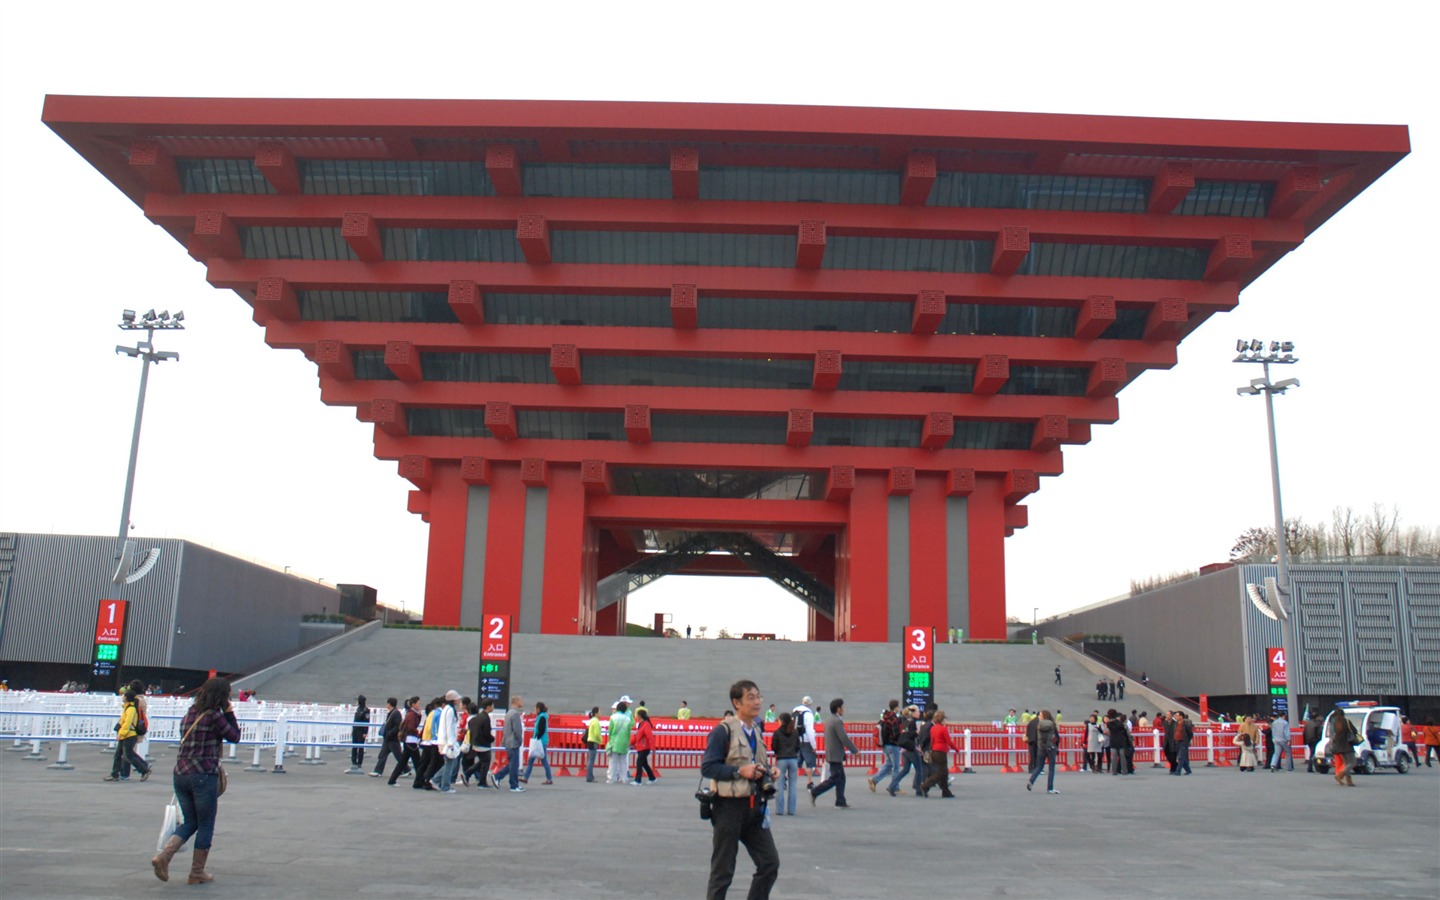 Commissioning of the 2010 Shanghai World Expo (studious works) #26 - 1440x900